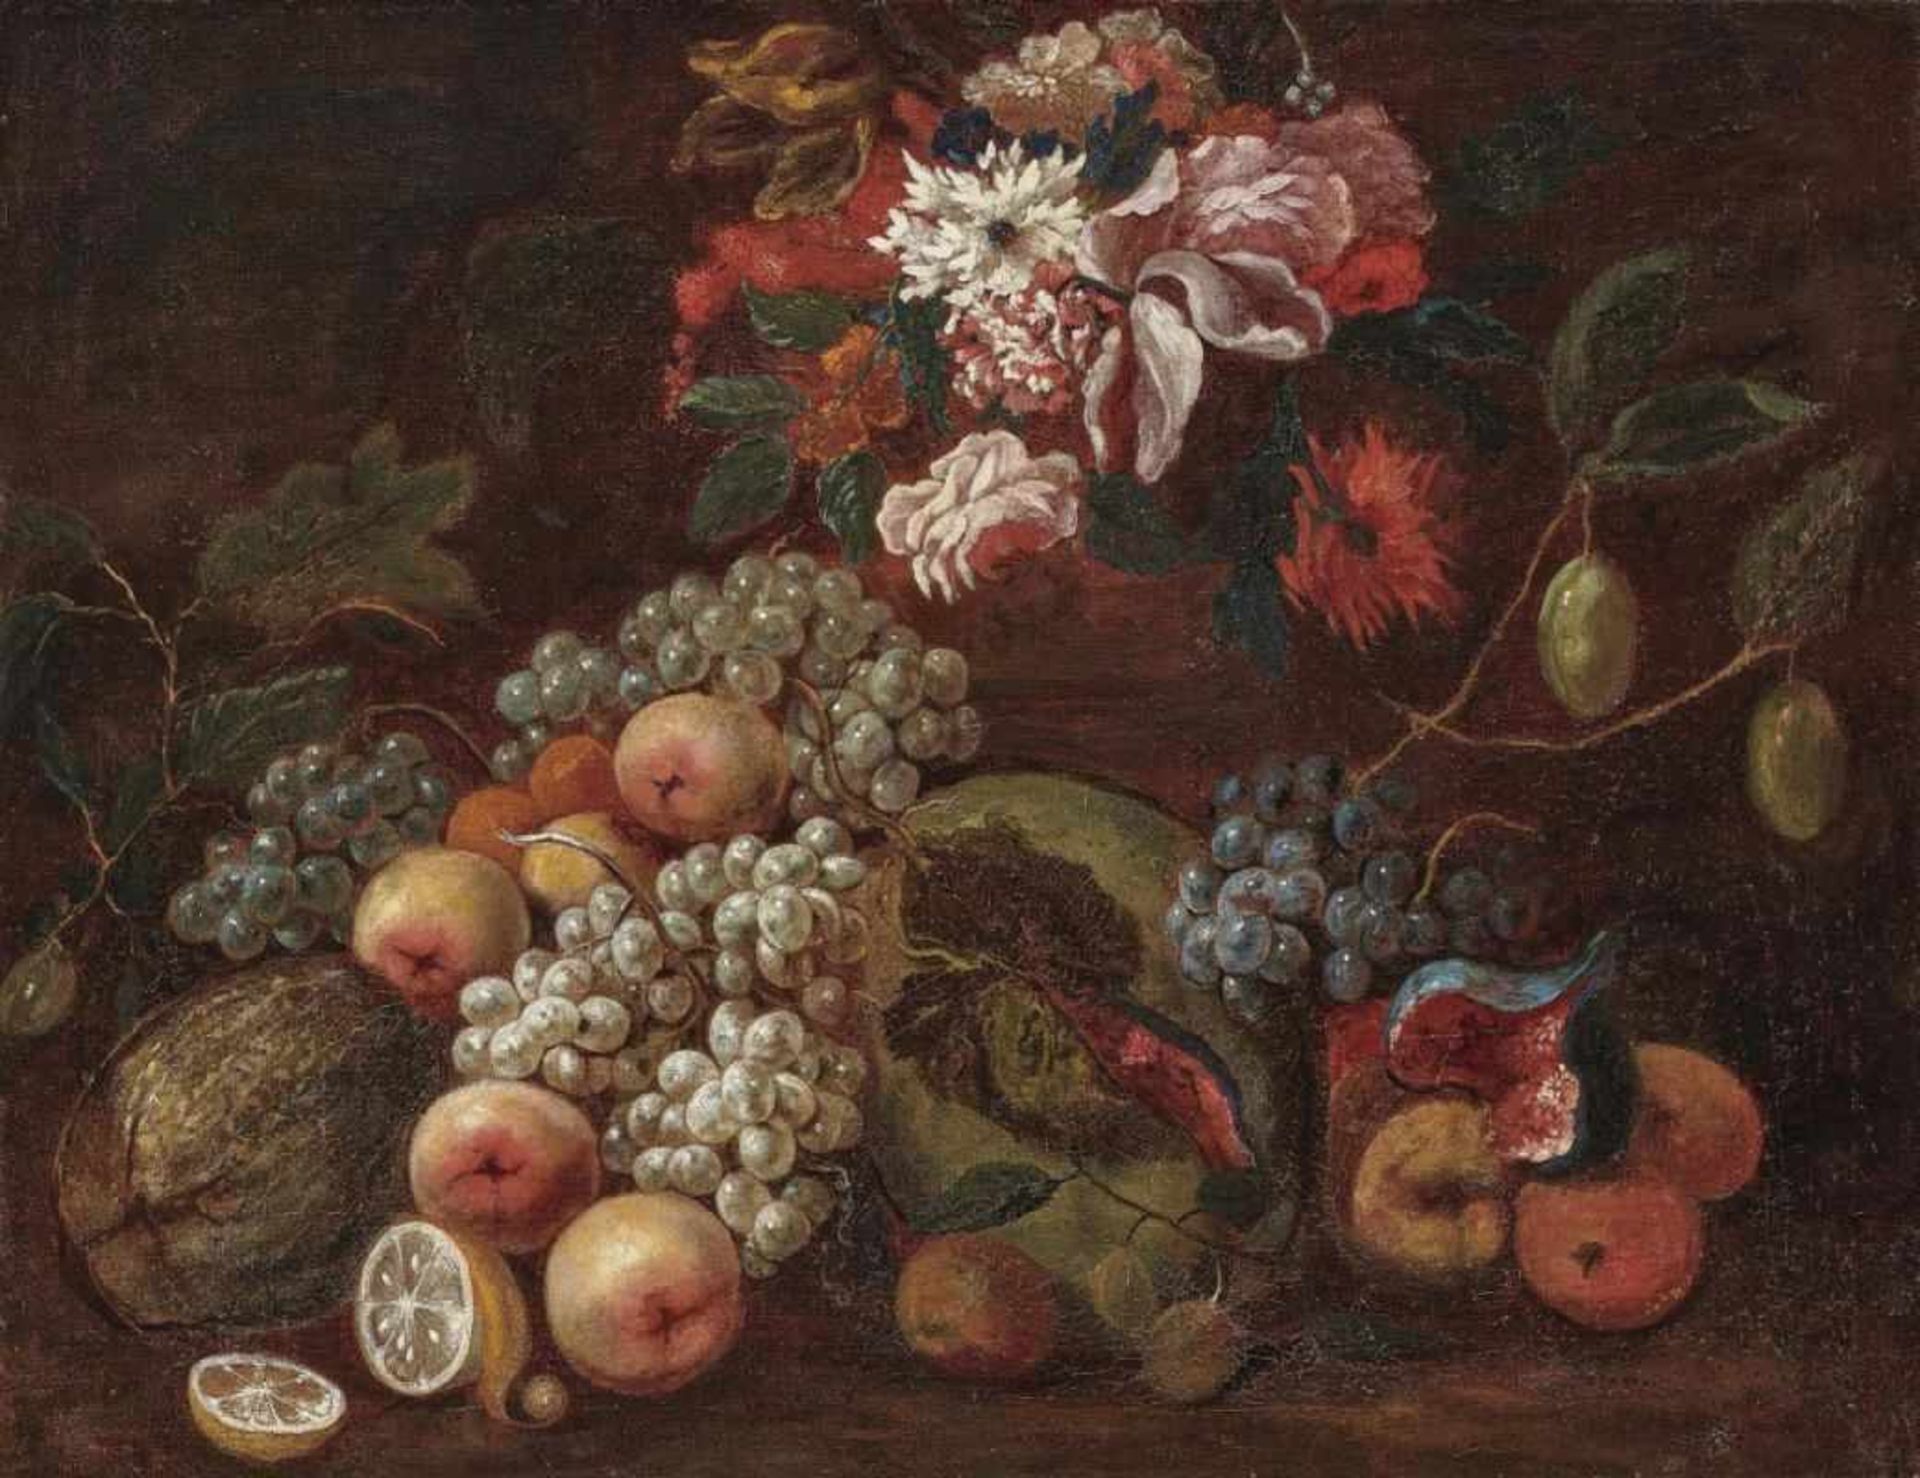 Italian School (Naples?), 17th centuryStill Life with Fruits and Flowers On the verso, old inventory